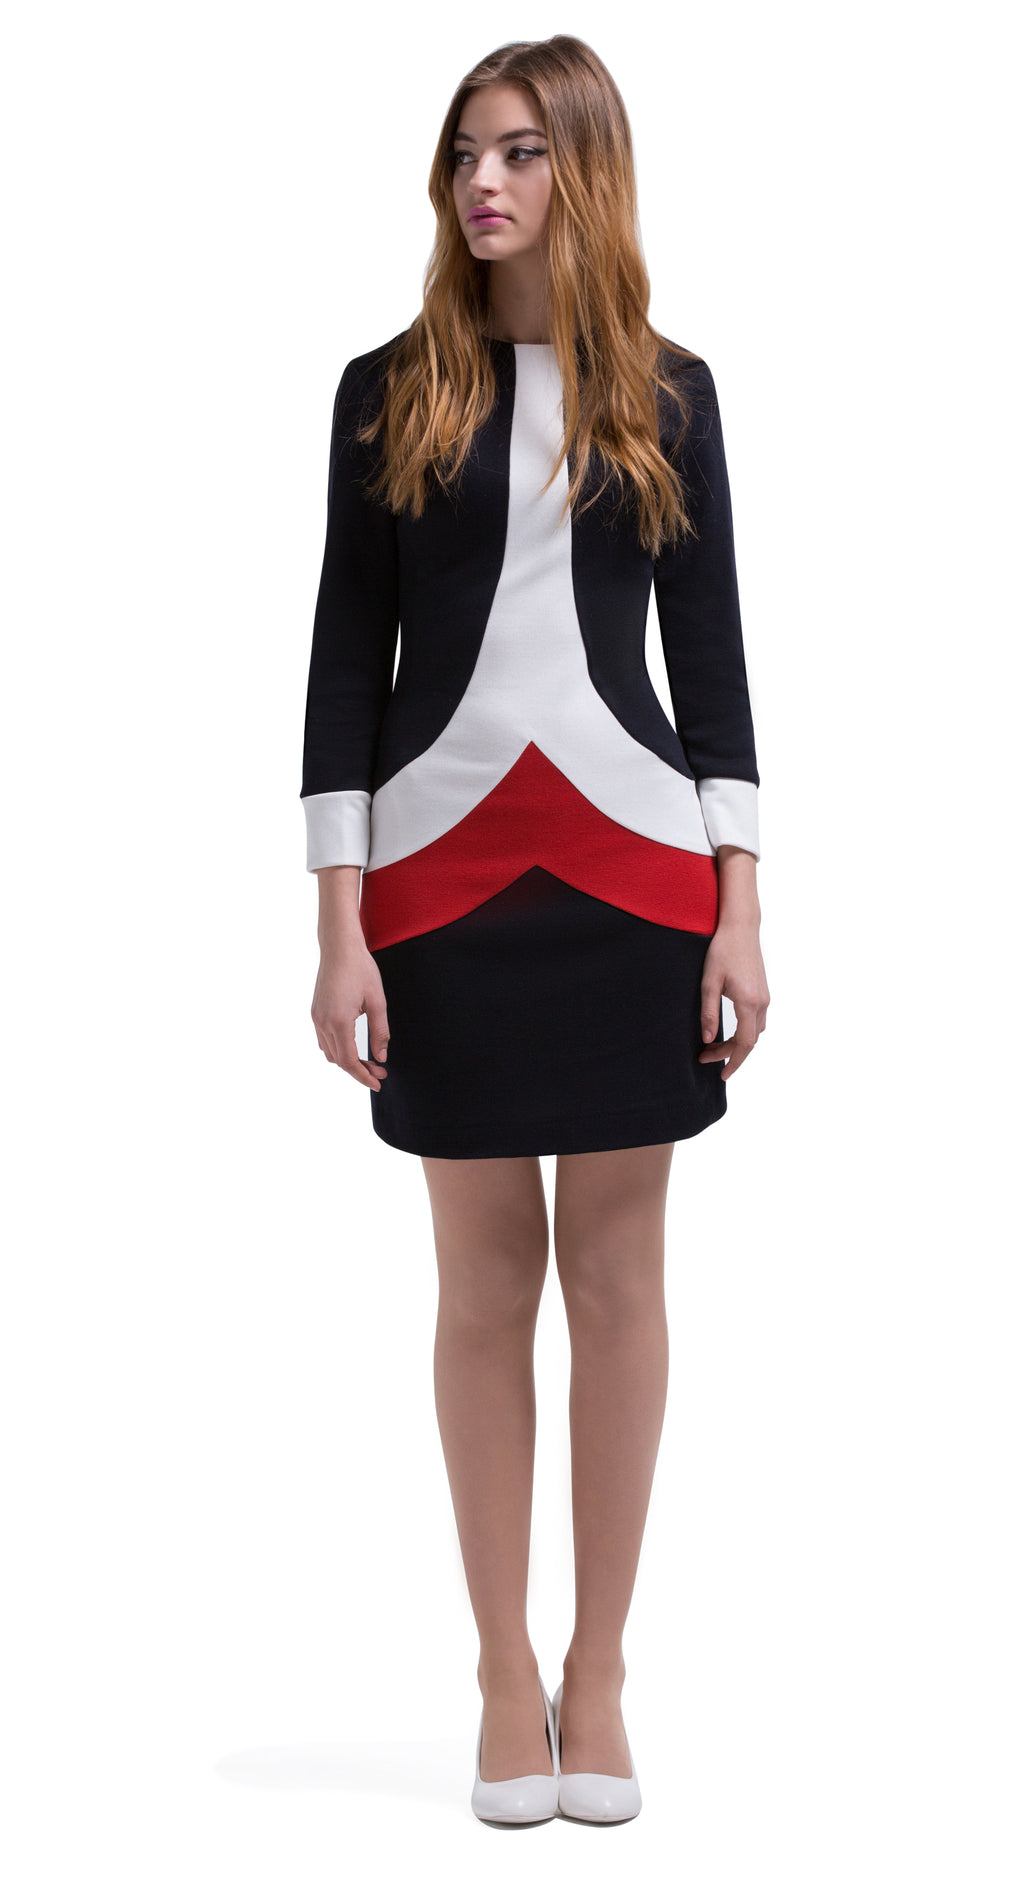 This Autumn, long sleeve Italian jersey straight cut dress delivers an immediate sixties retro impression through use of the chevron bodice panels creating a unique tric-olour stripe. Back zipper closure, full length sleeve with white cuff detailing. Generous stretch within the jersey; a comfortable dress without surrendering impacting style.